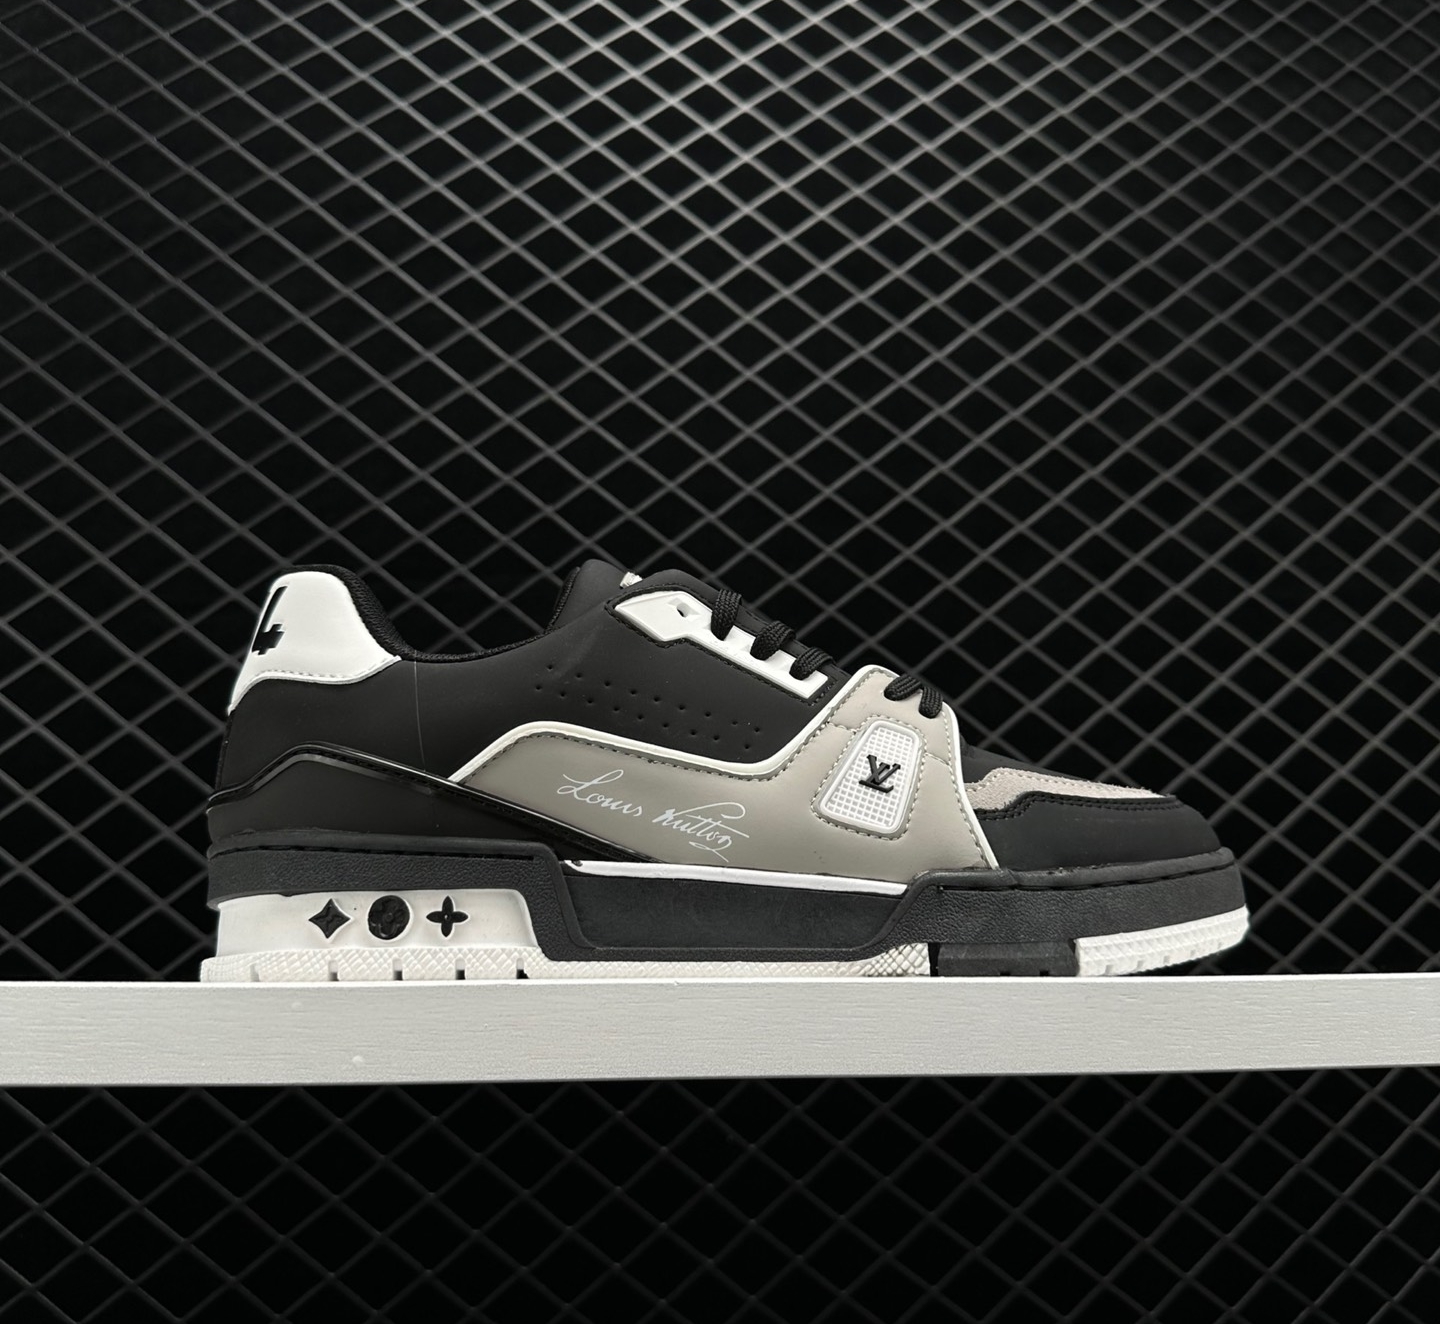 Louis Vuitton LV Trainer Black Grey White 1AAHS3 - Sleek and Stylish Footwear with Iconic Brand Appeal